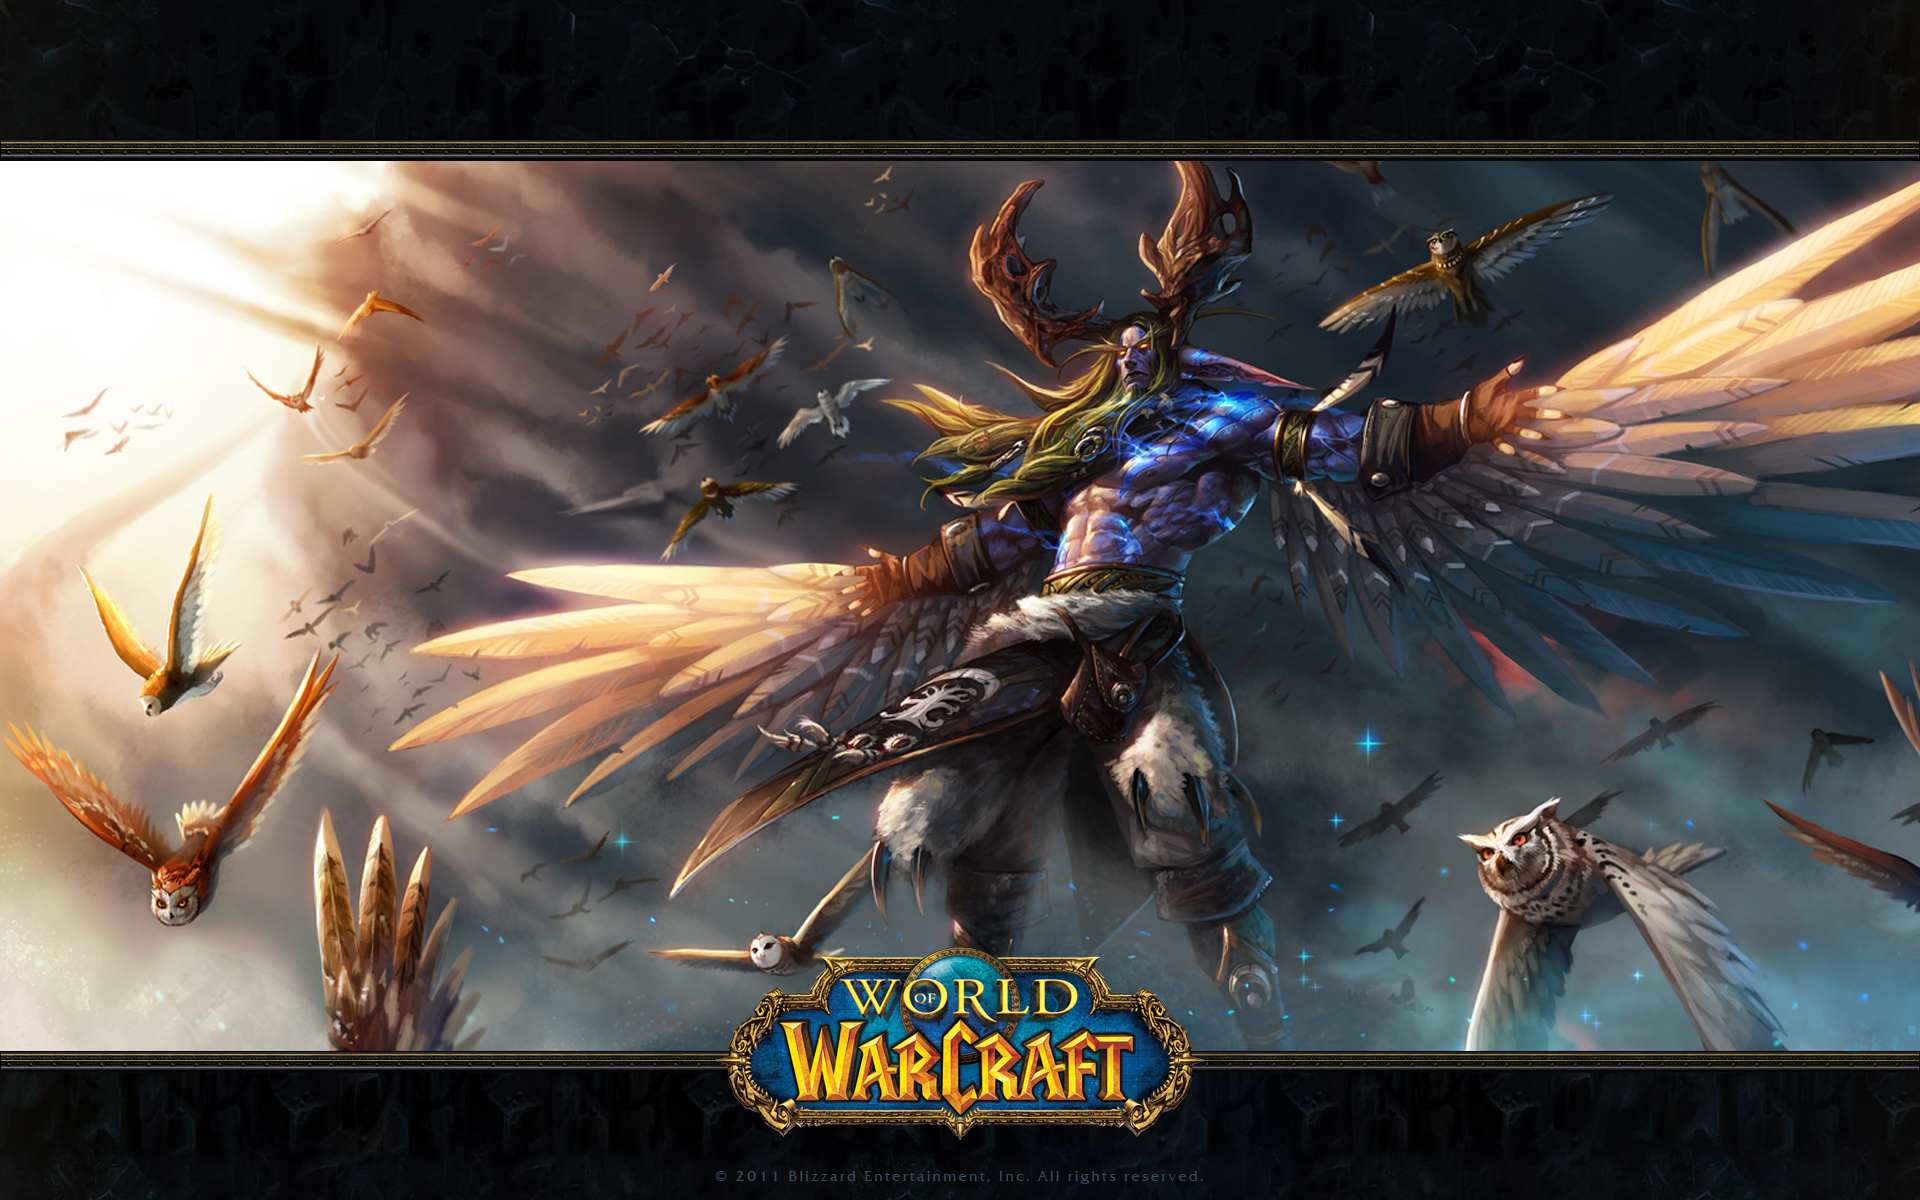 “World of Warcraft” Suffers Huge Player Loss - ....still #1 Subscriber-Based MMO In The World